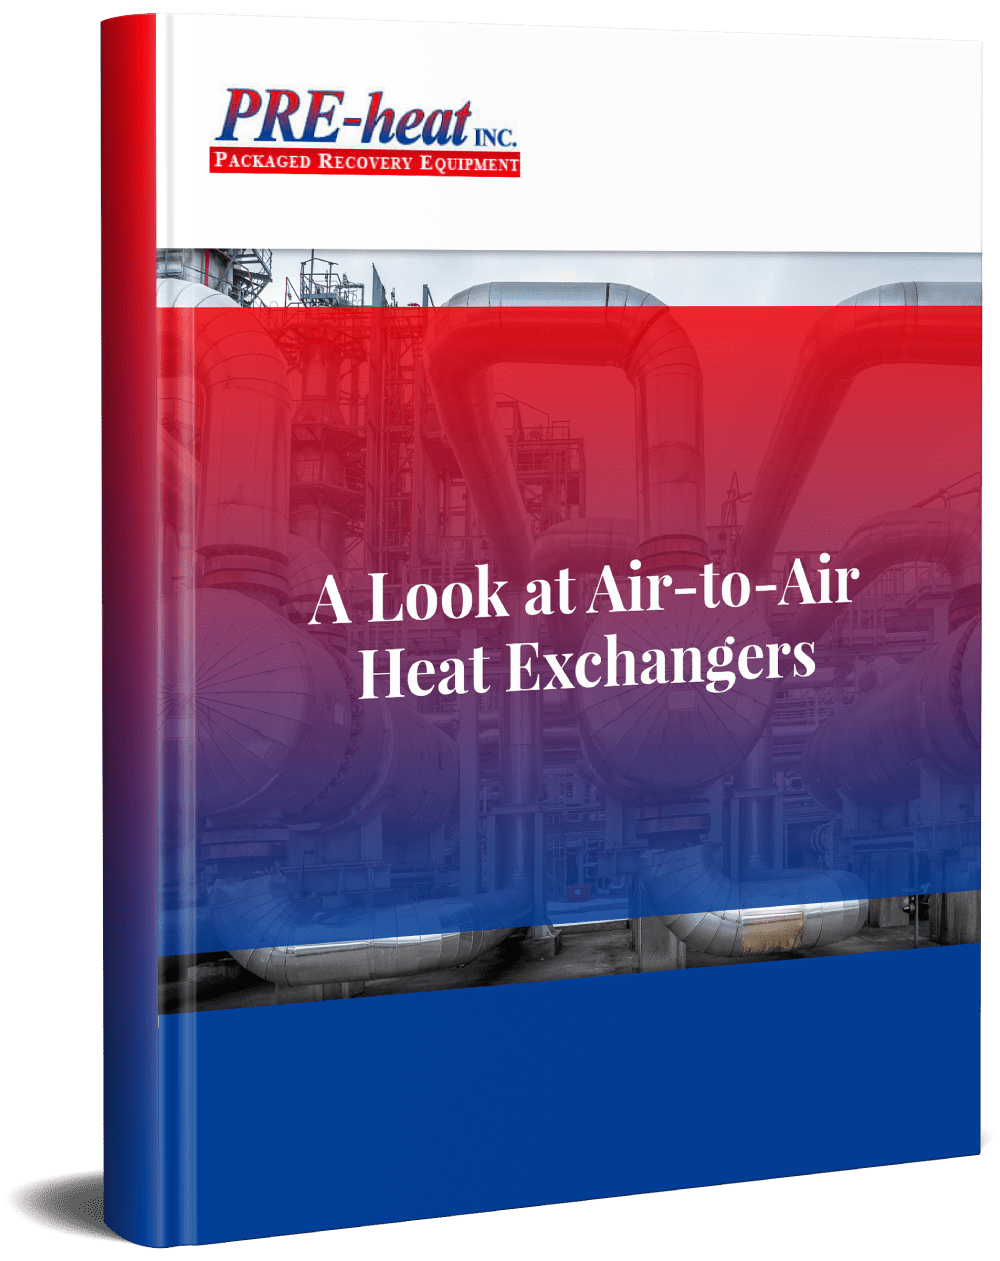 A Look at Air-to-Air Heat Exchangers